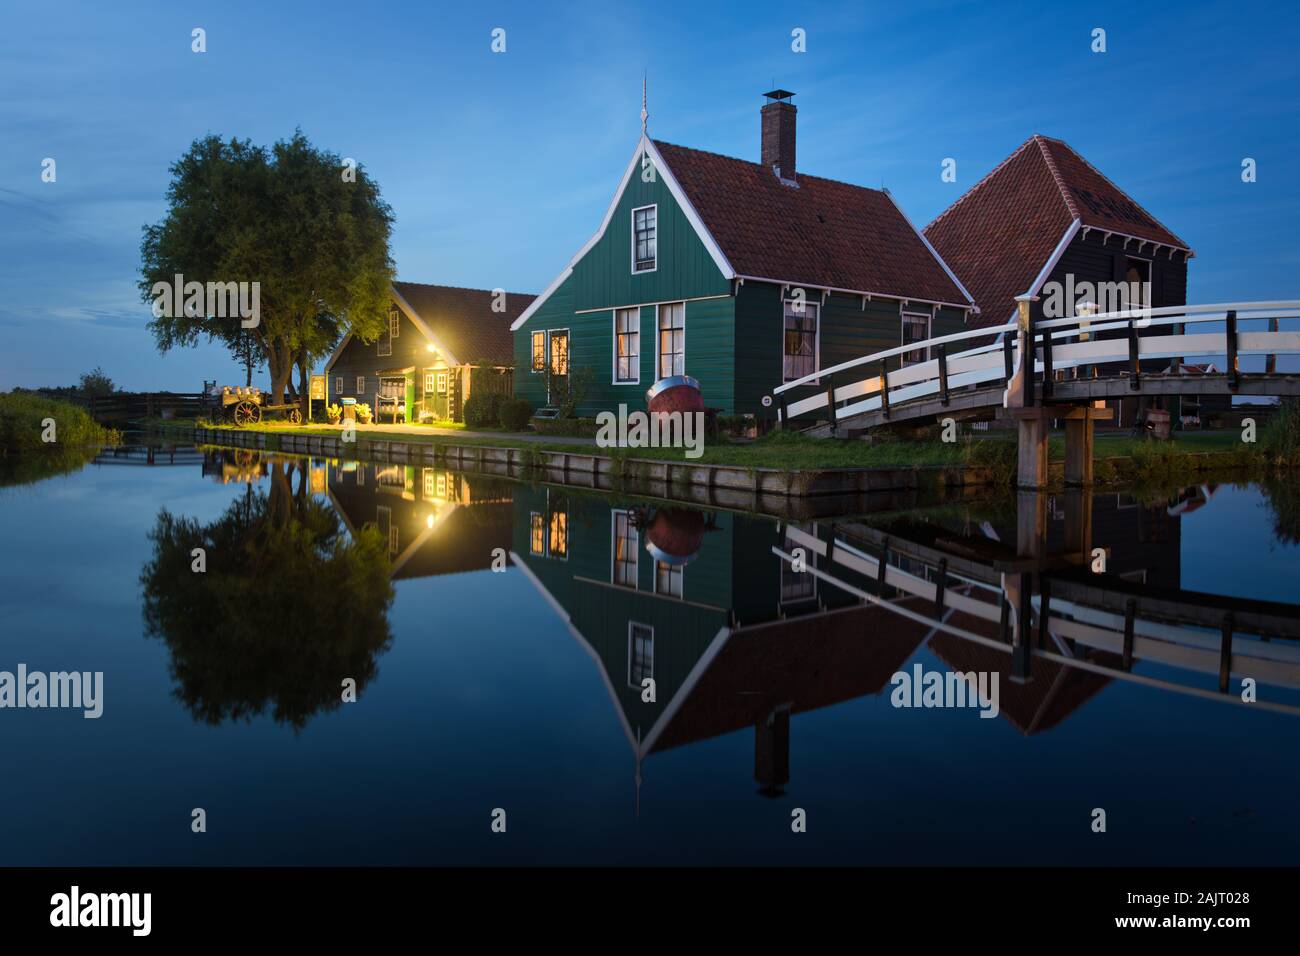 Traditional wooden cheese farm in green with a bridge with reflection in the water in Zaanse Schans, the Netherlands in the blue hour at twilight. Stock Photo